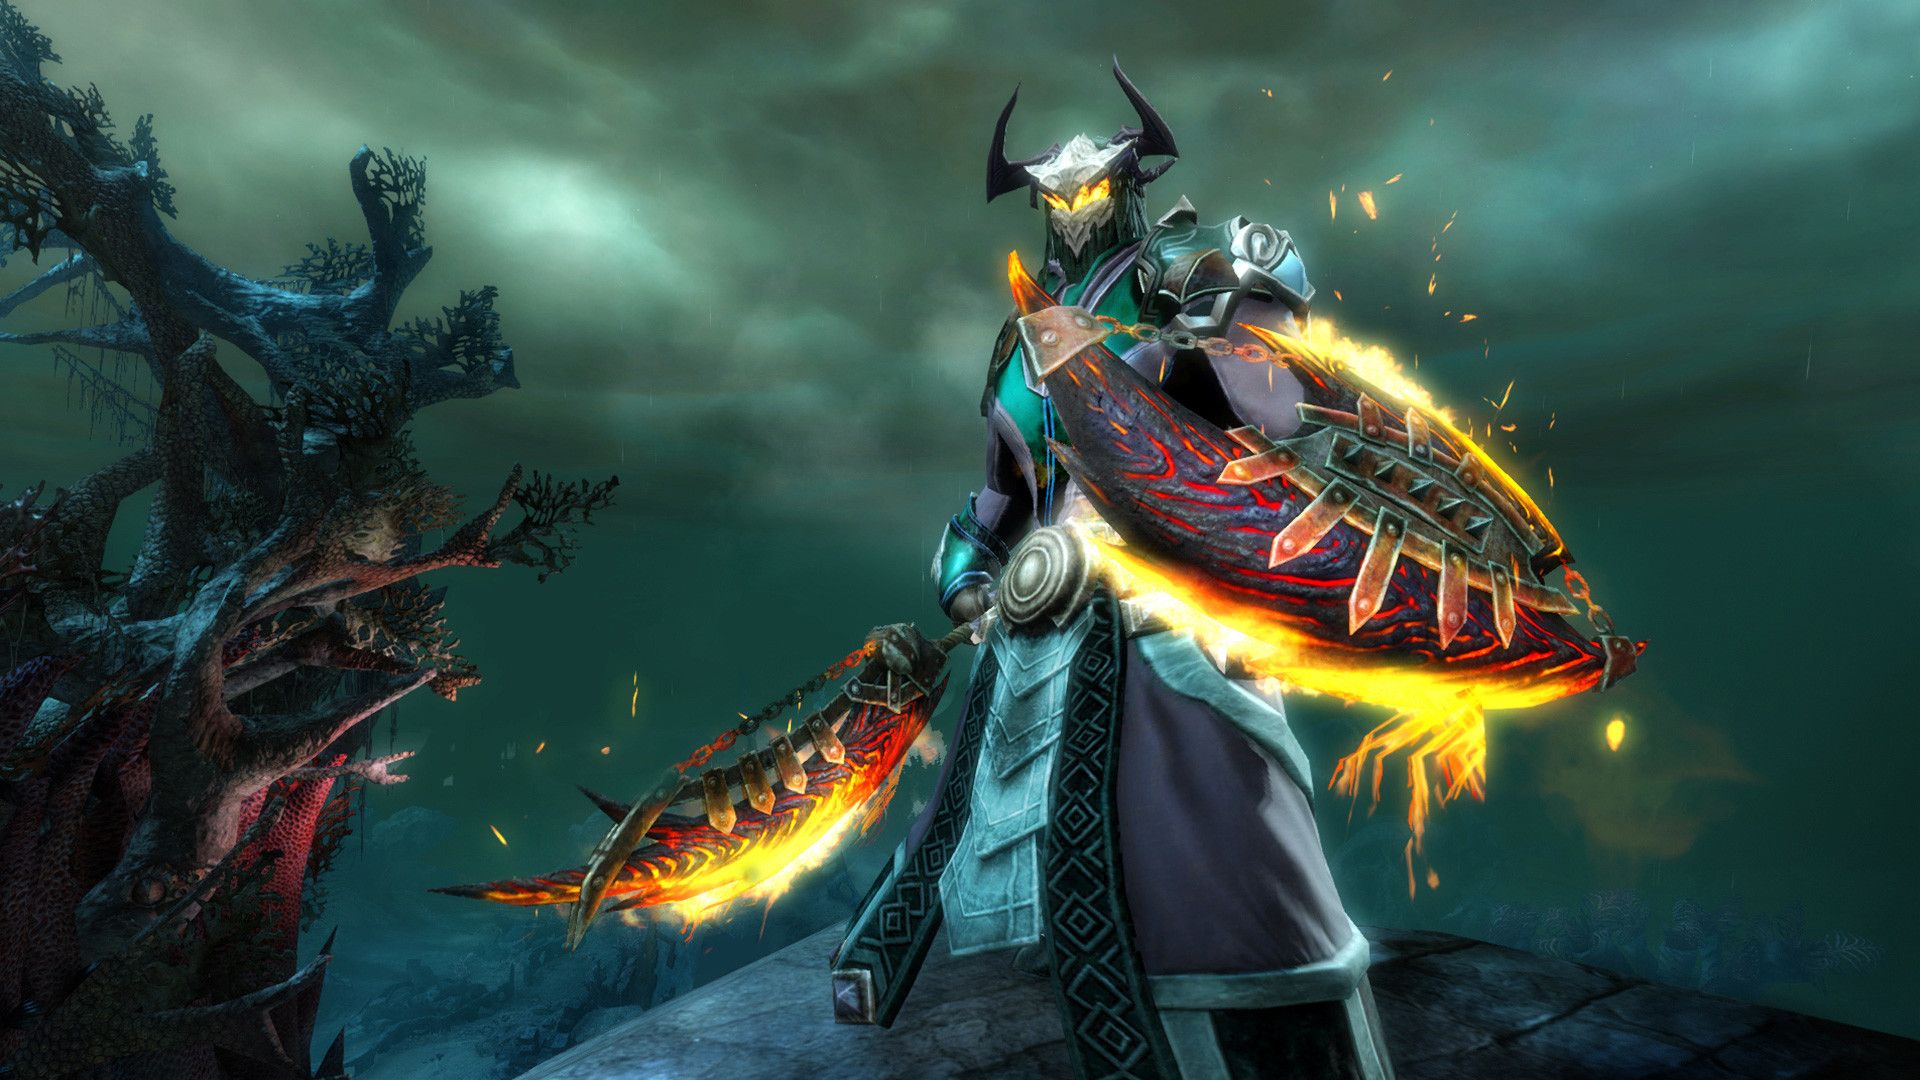 If you want to learn how to create your own legendary ring Conflux from World vs World, this GW2 Conflux legendary ring guide is just the thing for you.